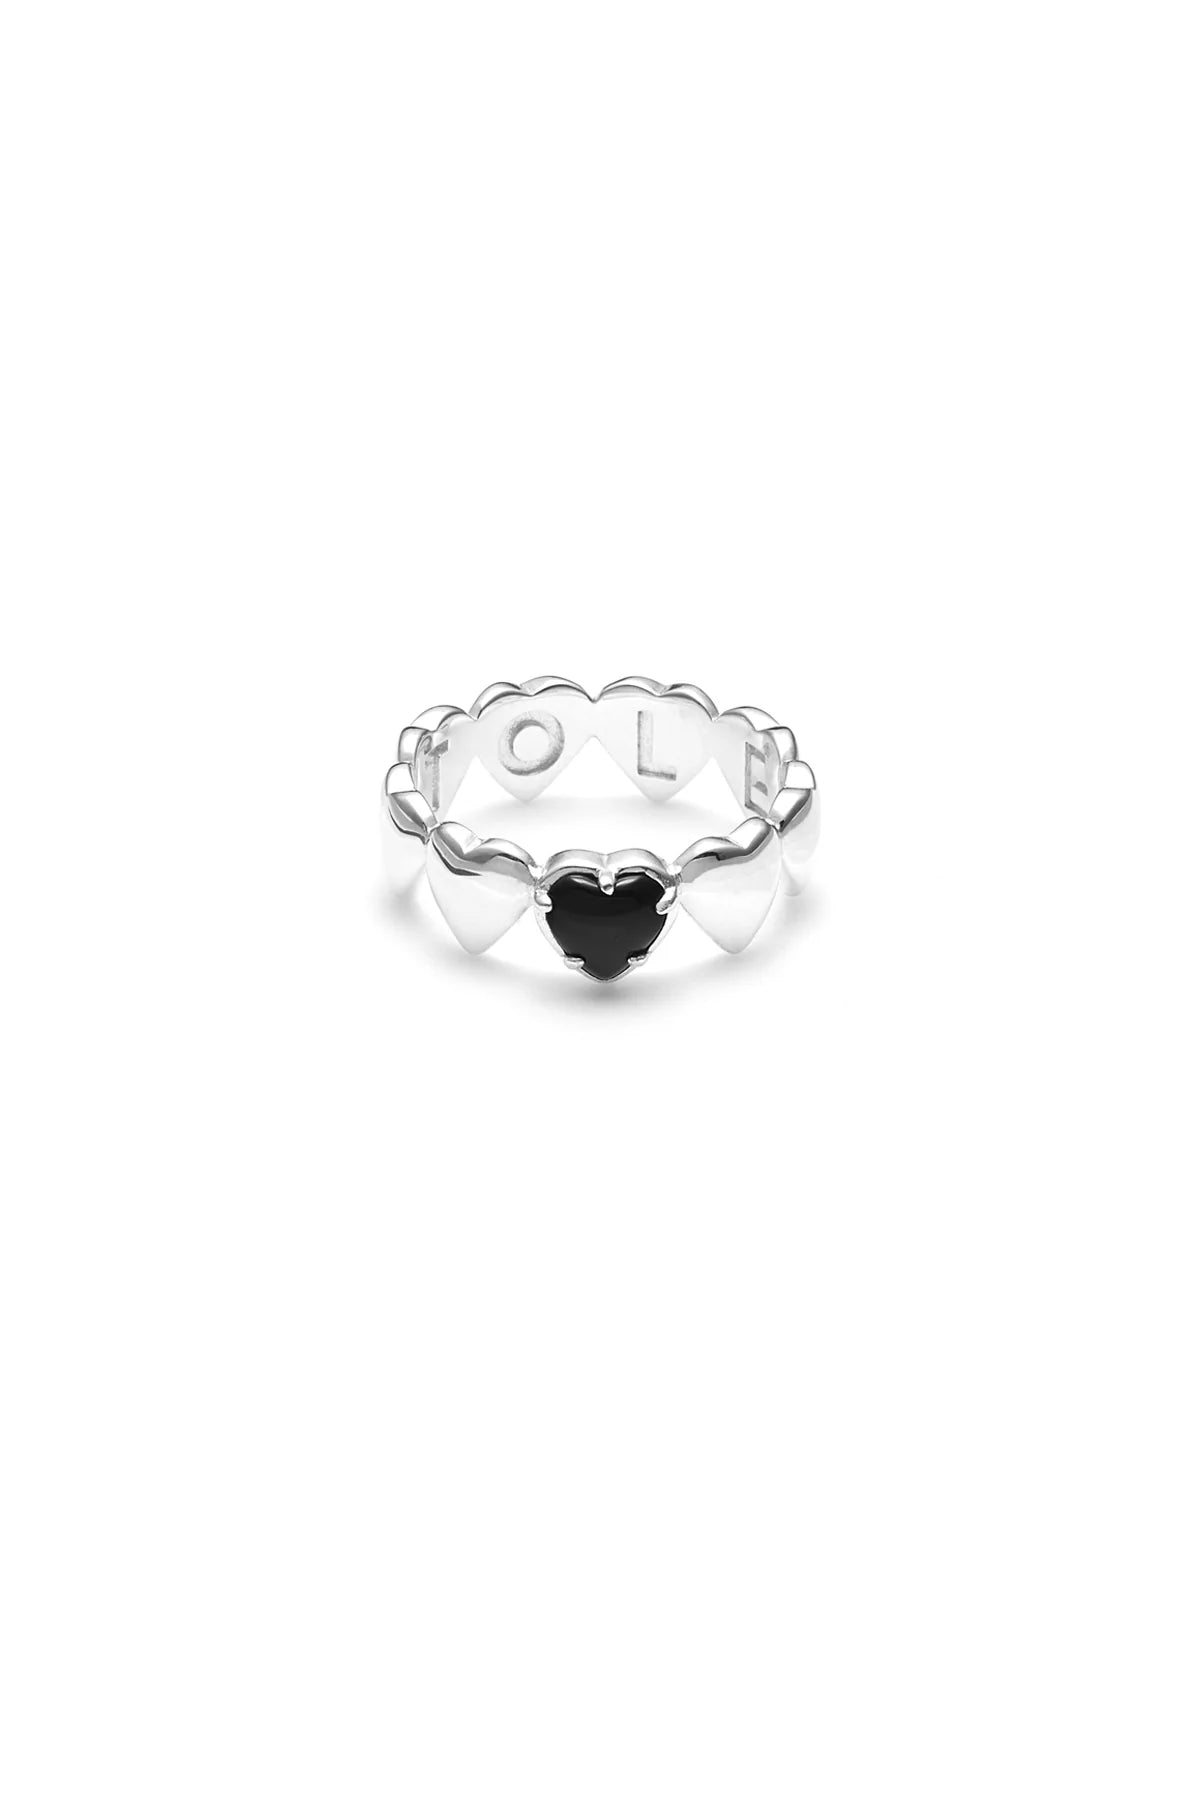 Band of Hearts Ring-Q Onyx